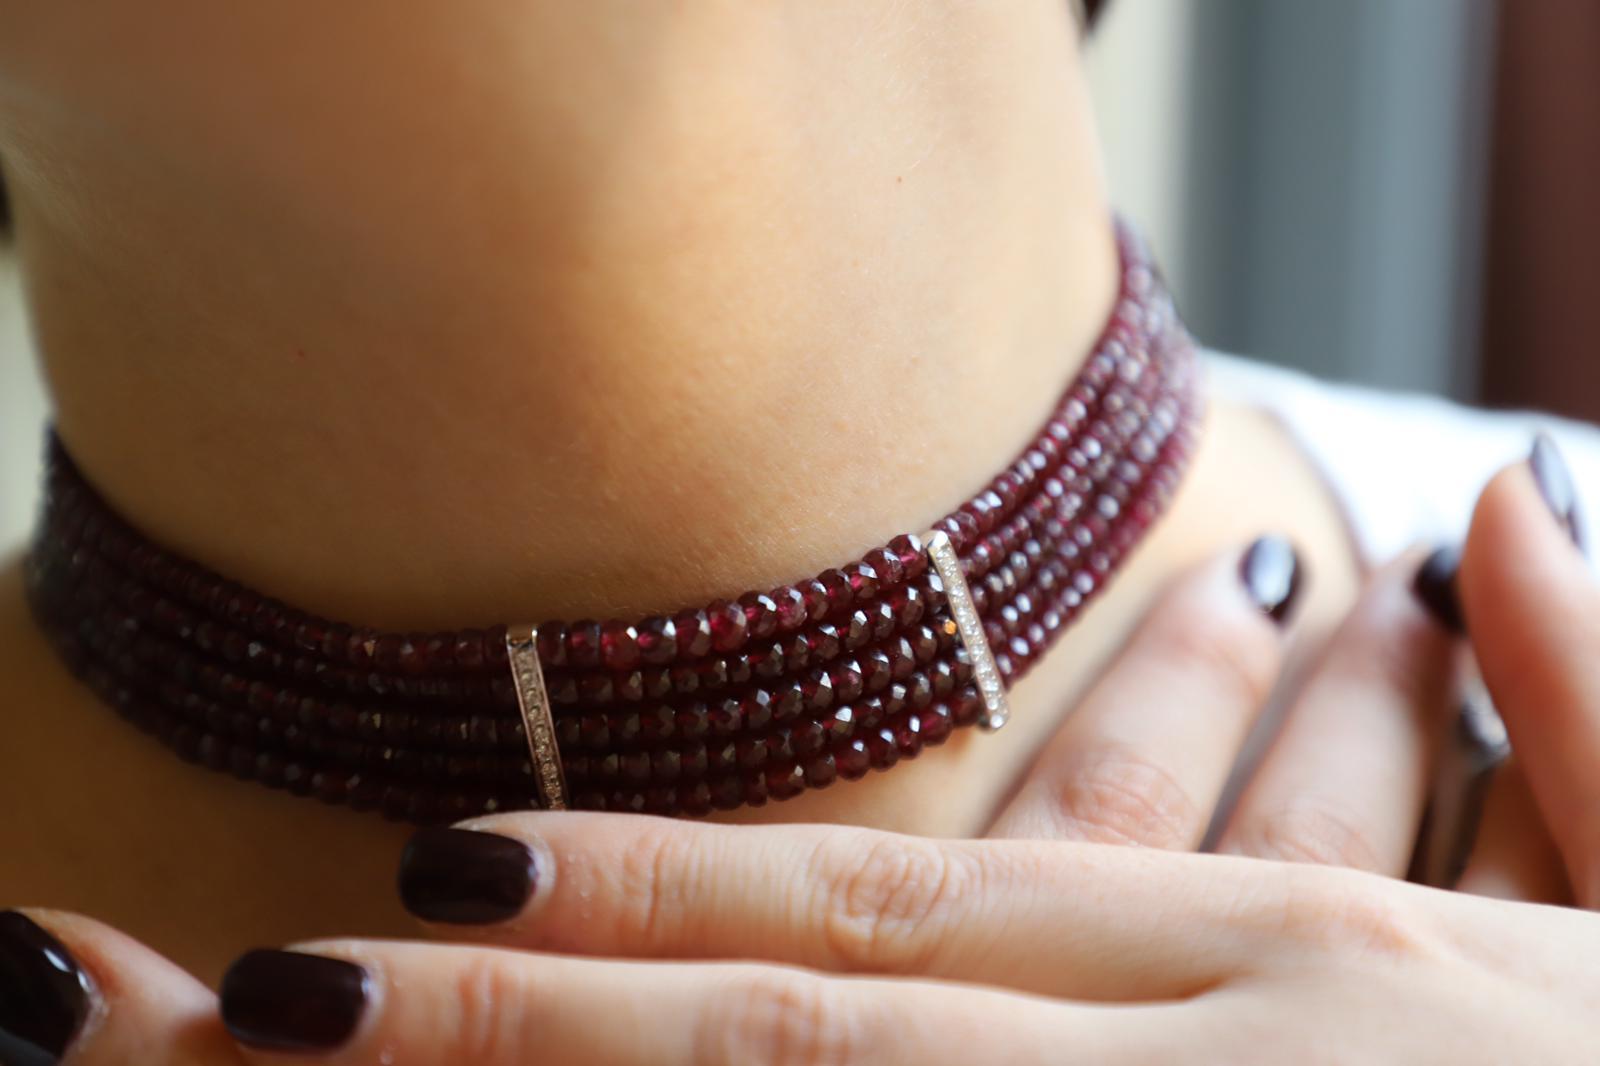 Introducing the Rossella Ugolini Choker: A masterpiece of Italian craftsmanship, uniting deep red Garnet beads with 18K white Diamonds. With 7 Garnet rows and front bars featuring 24 Diamonds, it blends classic elegance and modern allure. Clasp in